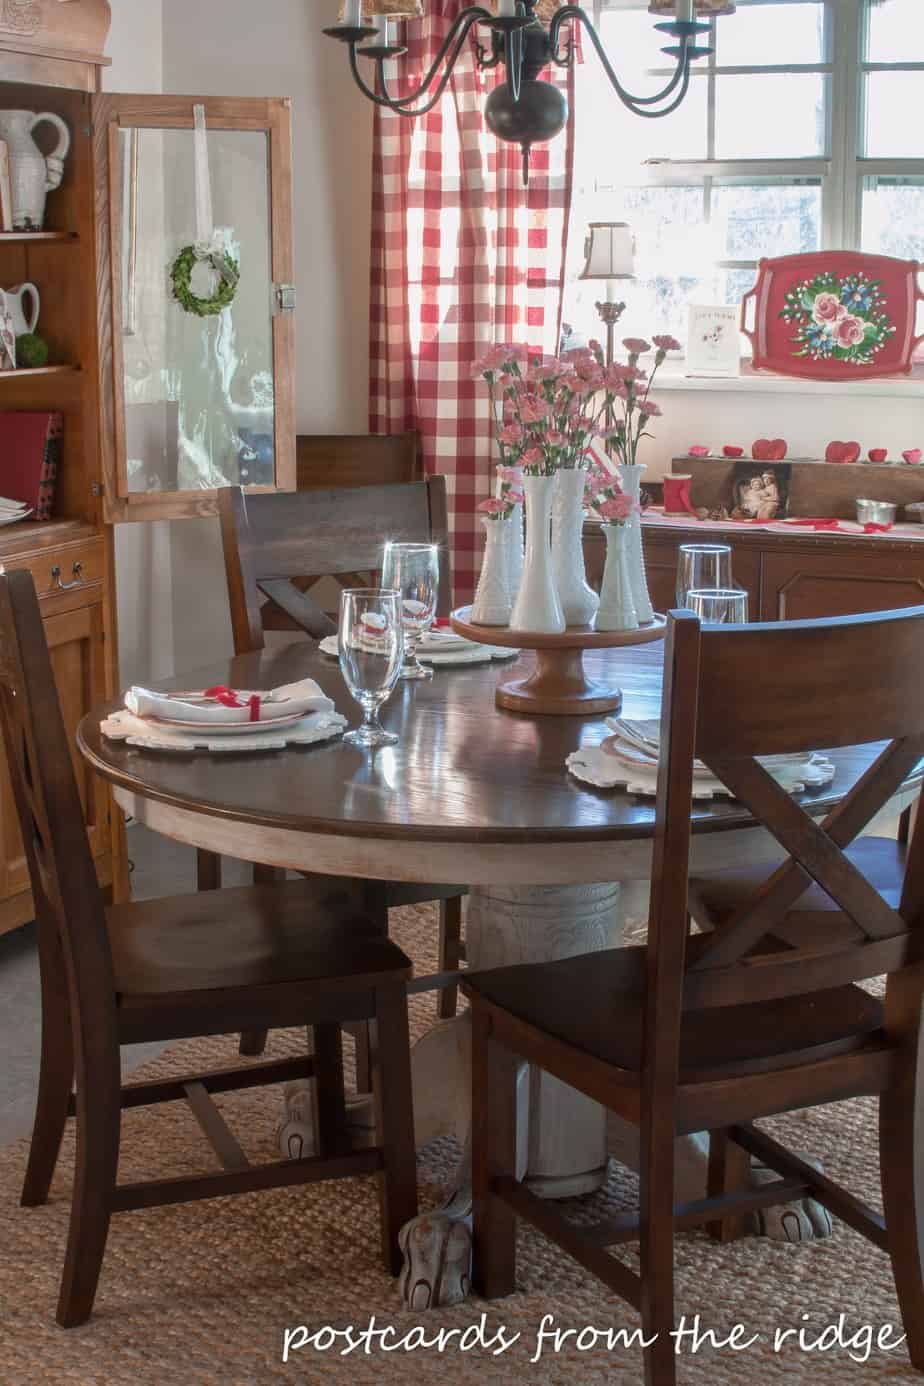 French farmhouse style dining area with buffalo check curtains, milk glass, ironstone, and more.